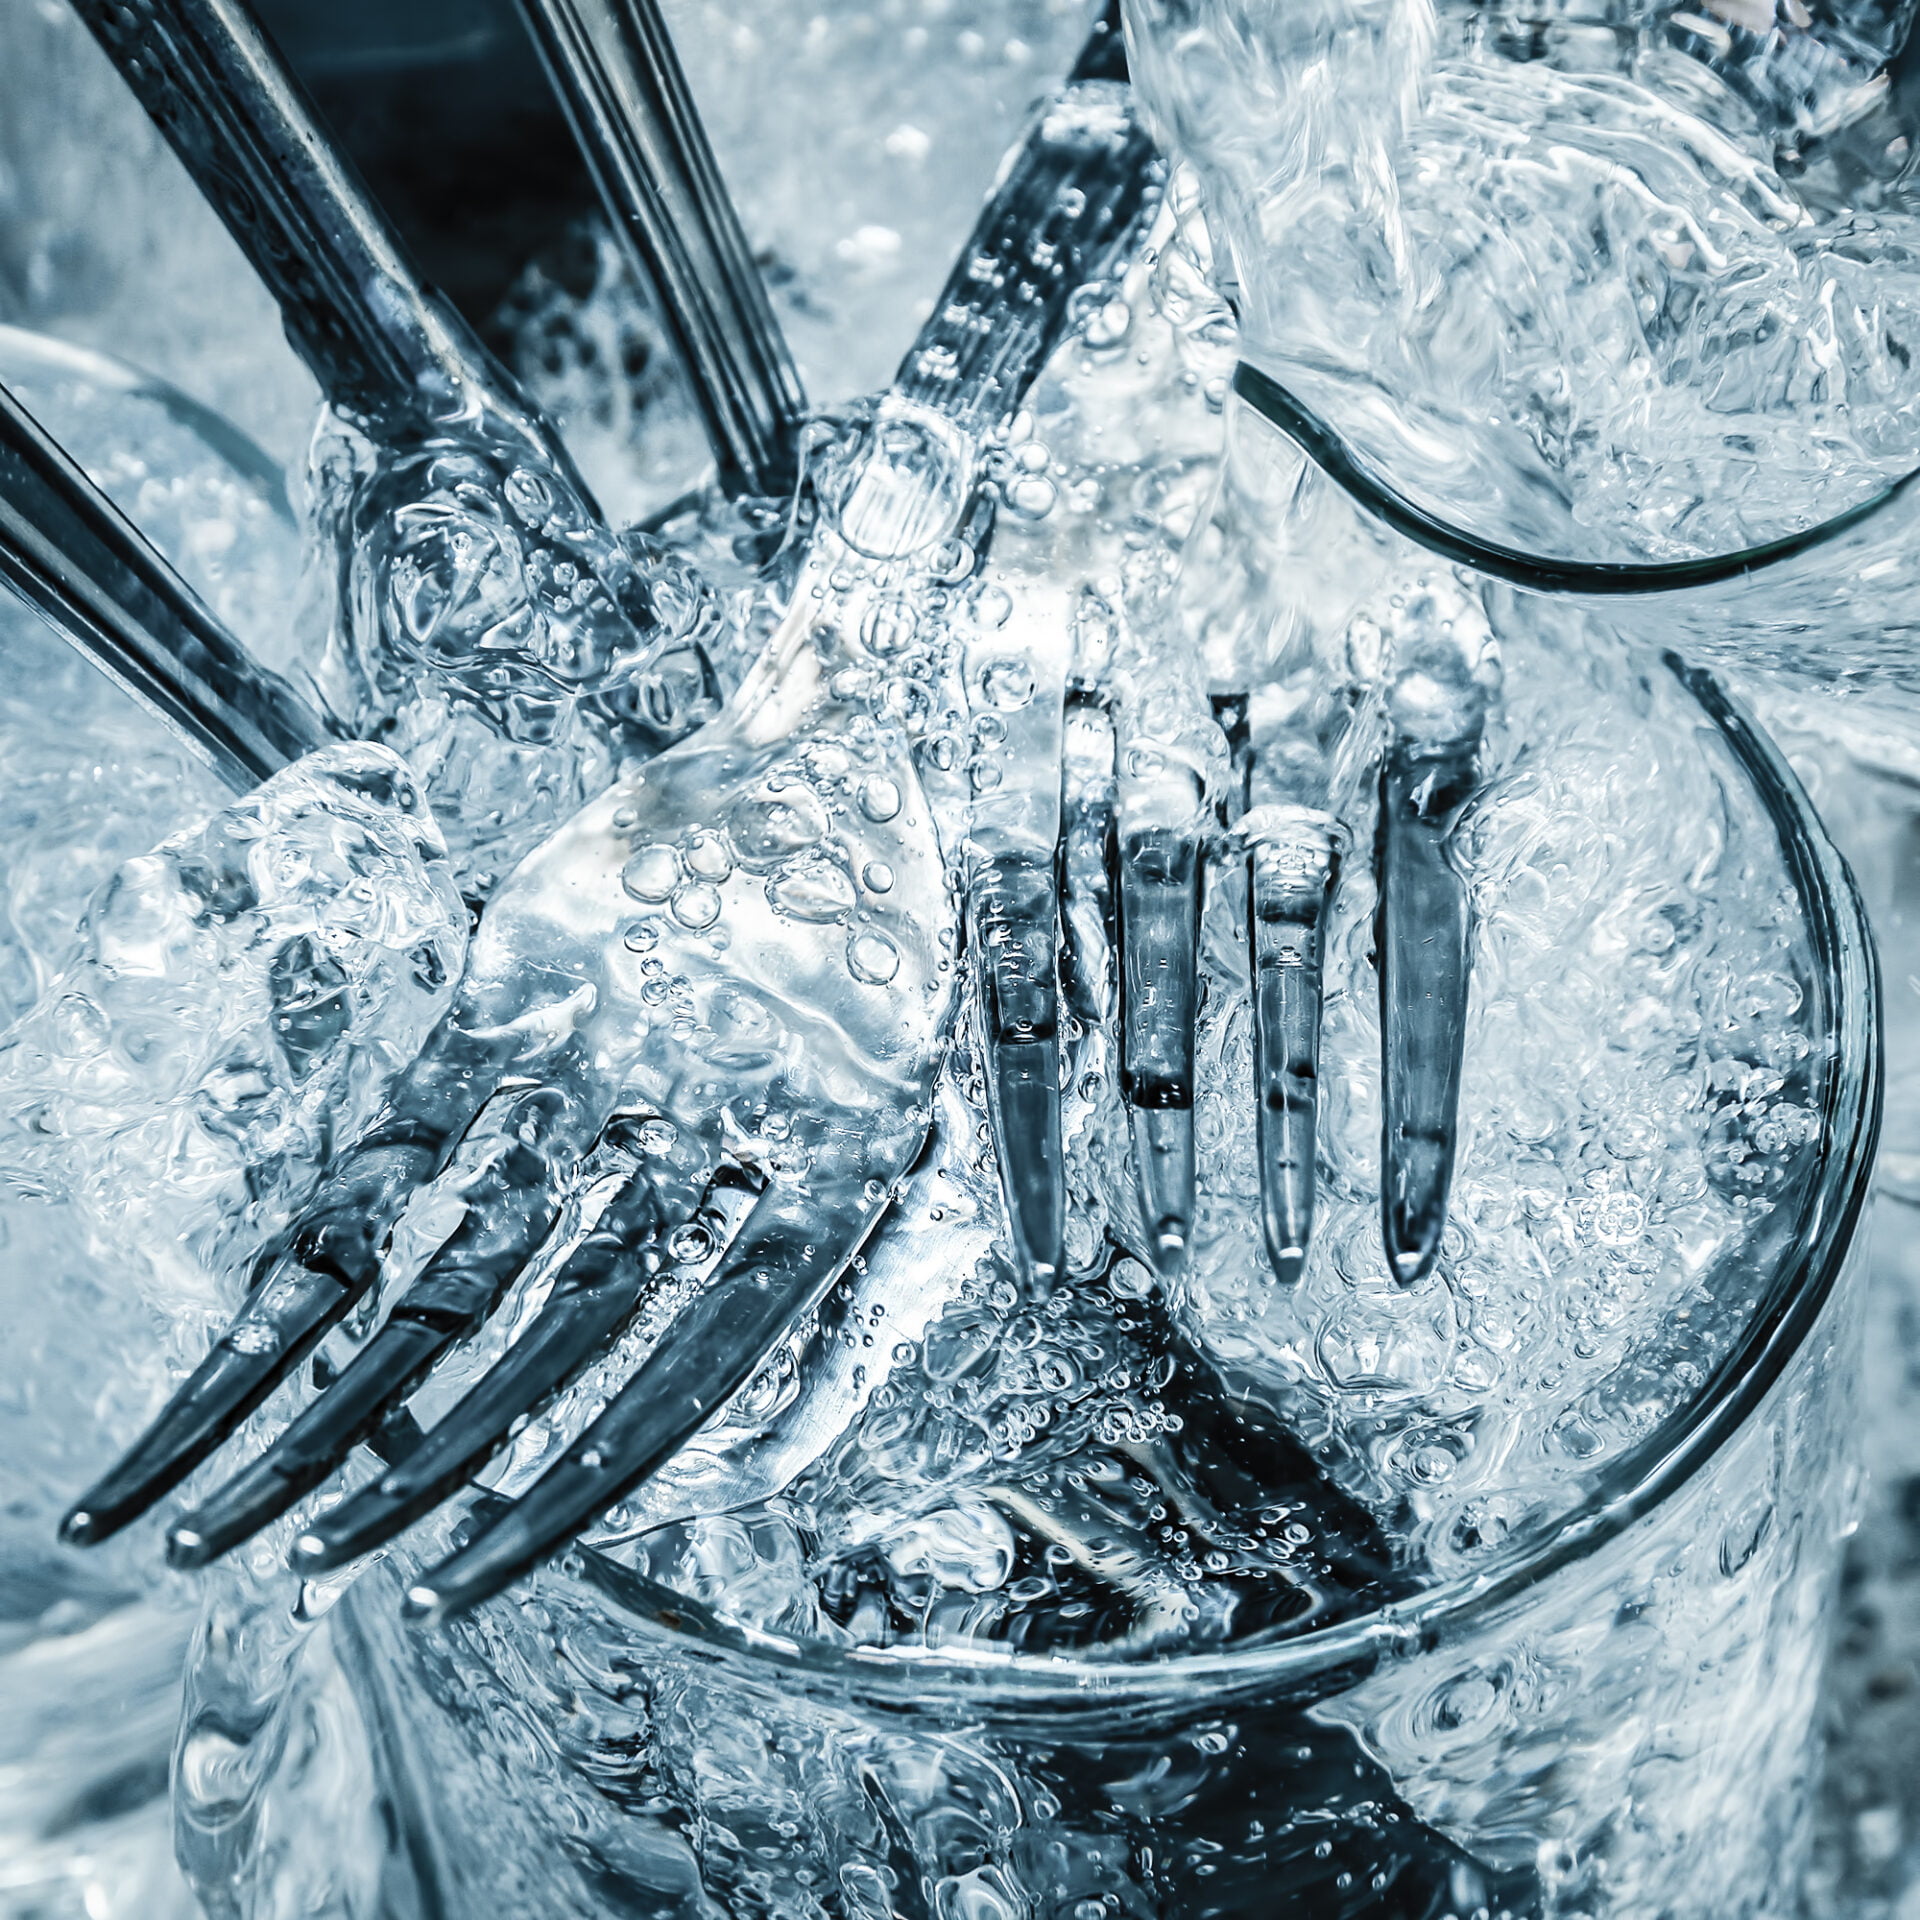 Forks,knives and glasses under a stream of water